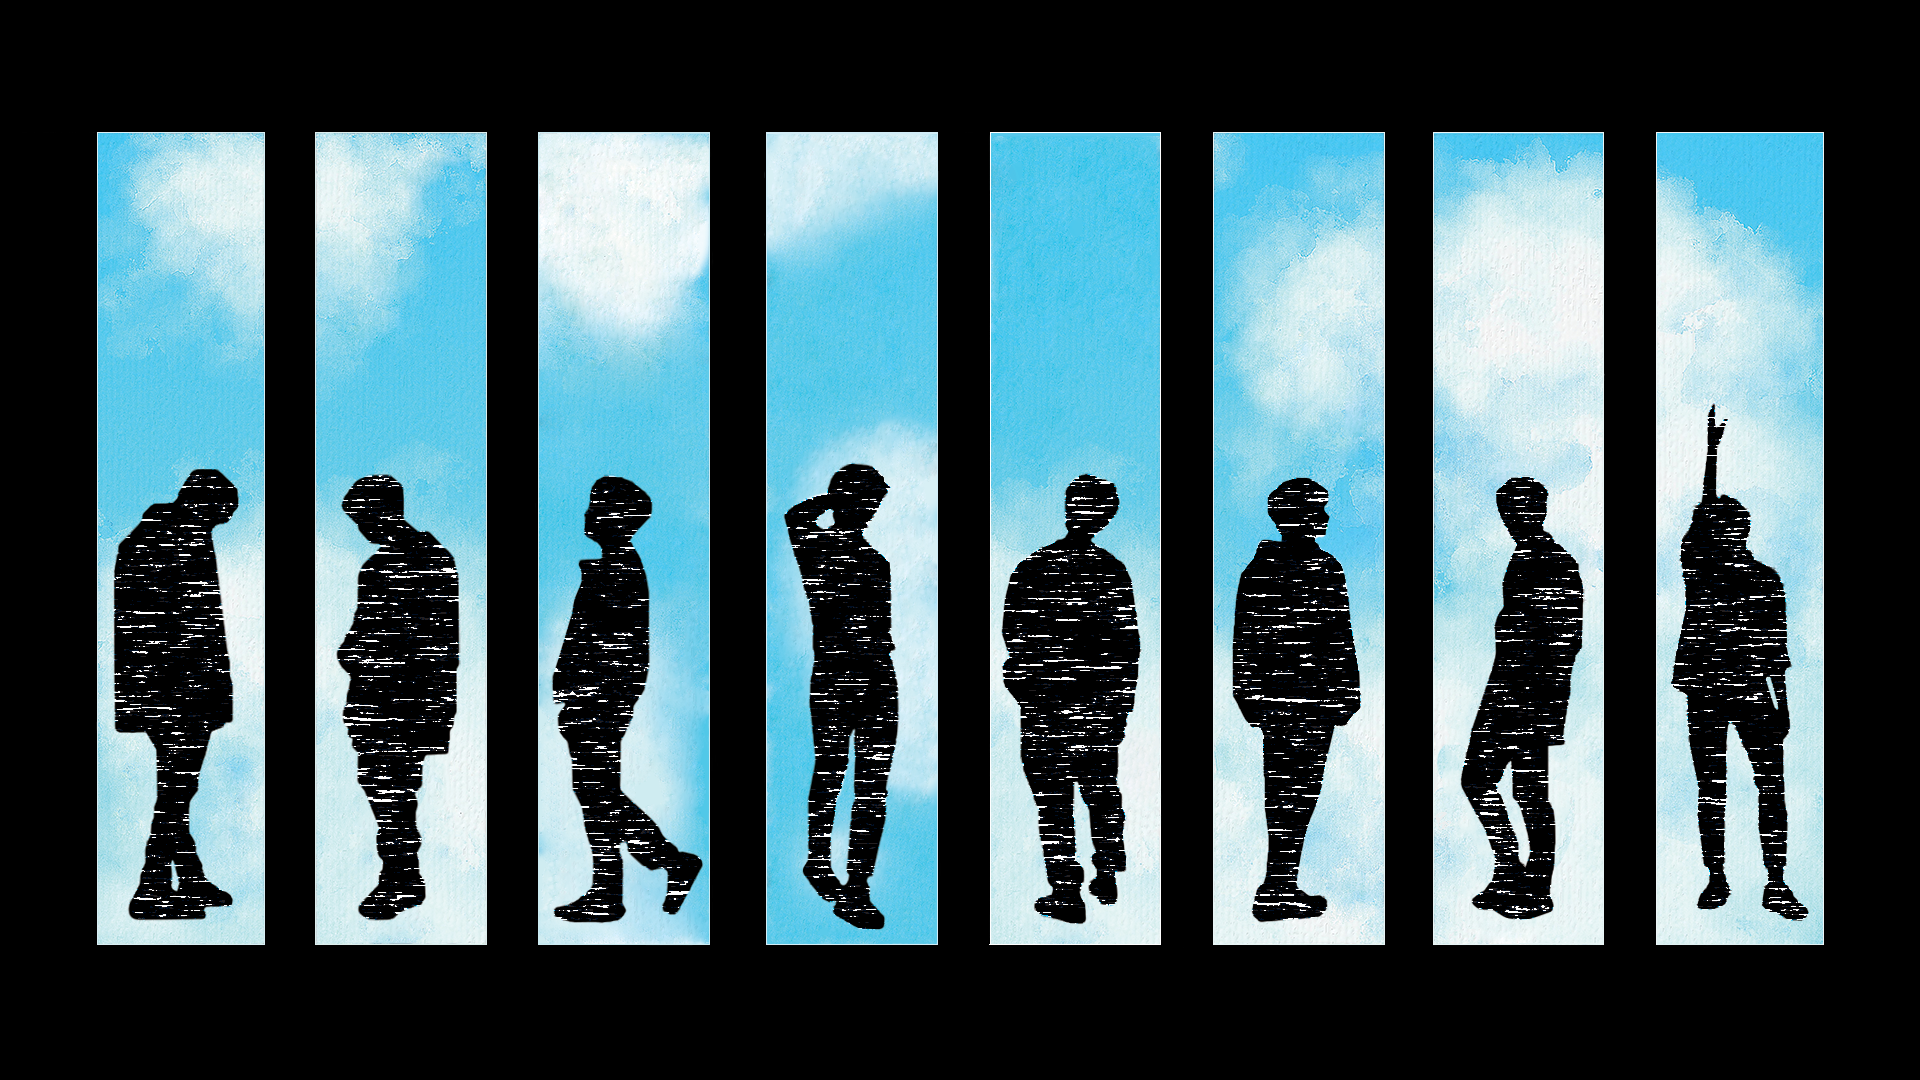 So. I made a simple wallpaper with everyone's silhouettes from the Levanter dance practice(s)